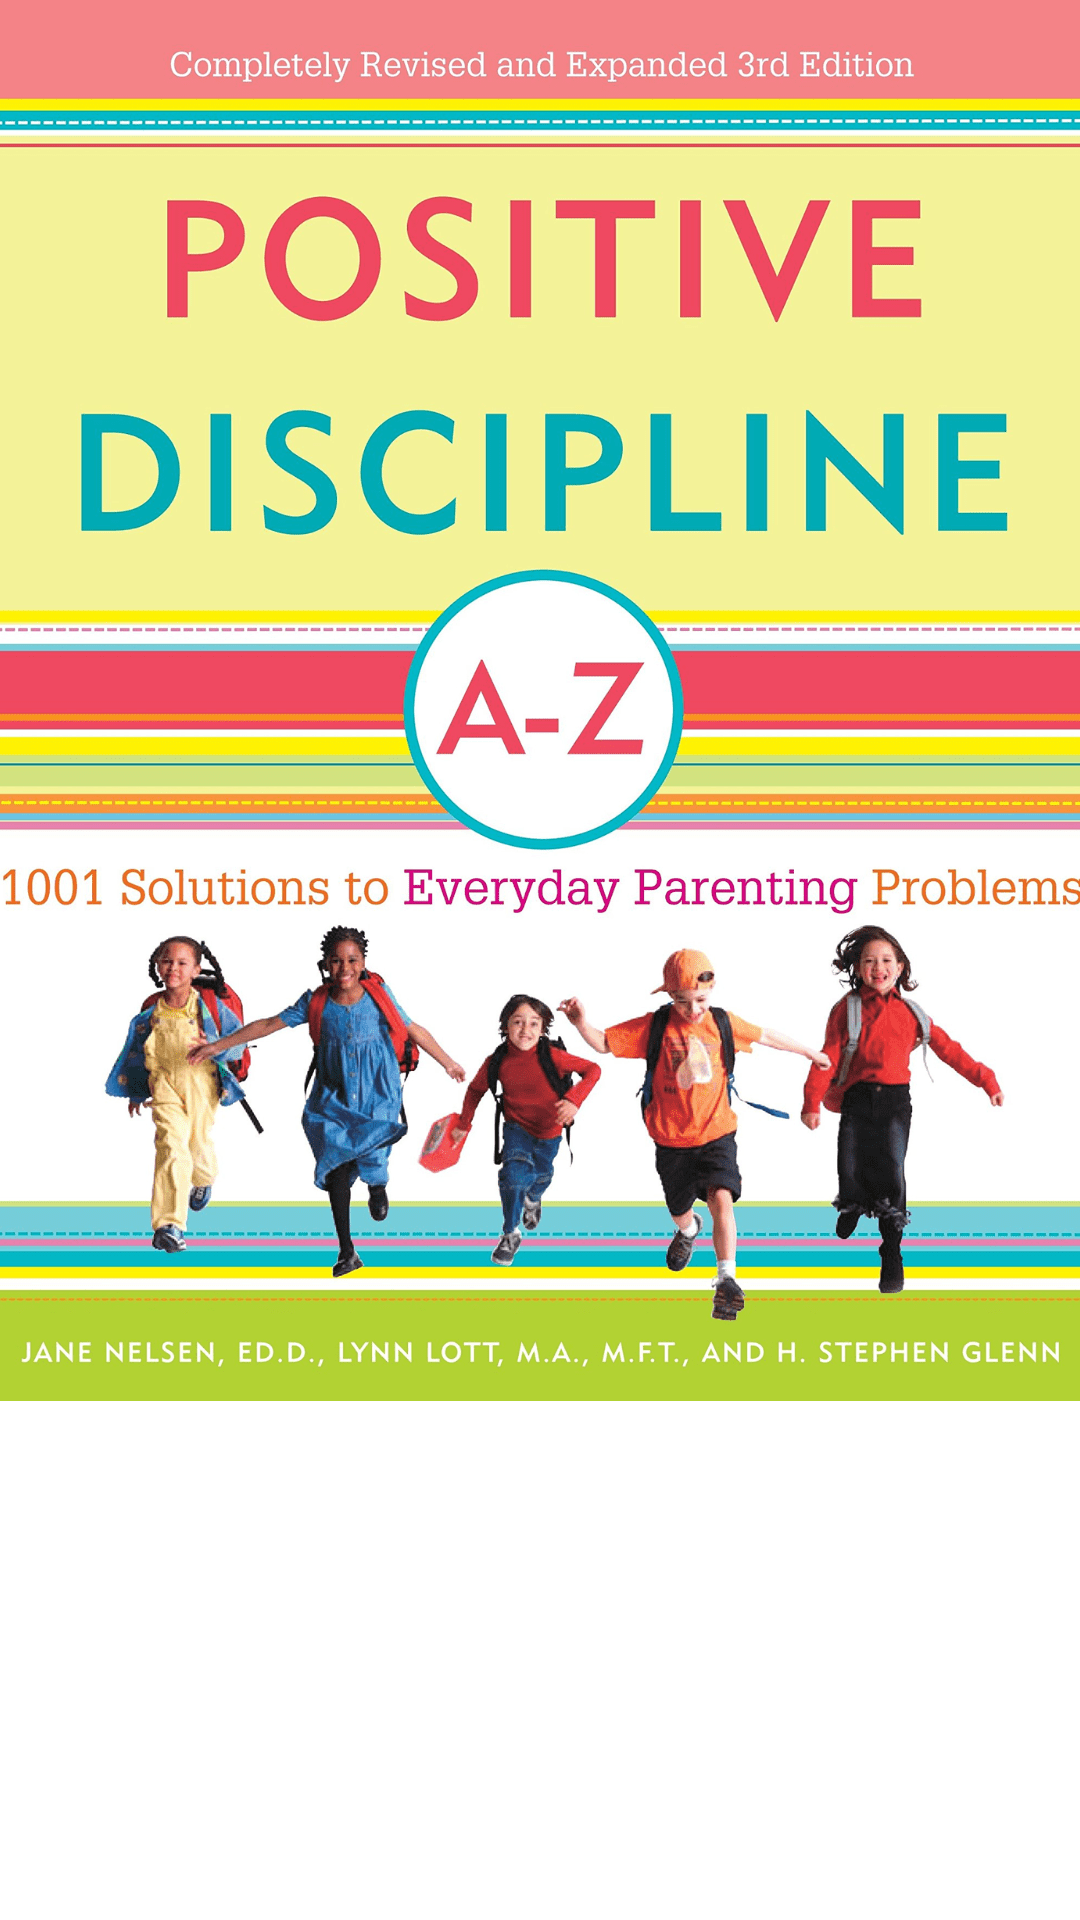 Positive Discipline A-Z : 1001 Solutions to Everyday Parenting Problems